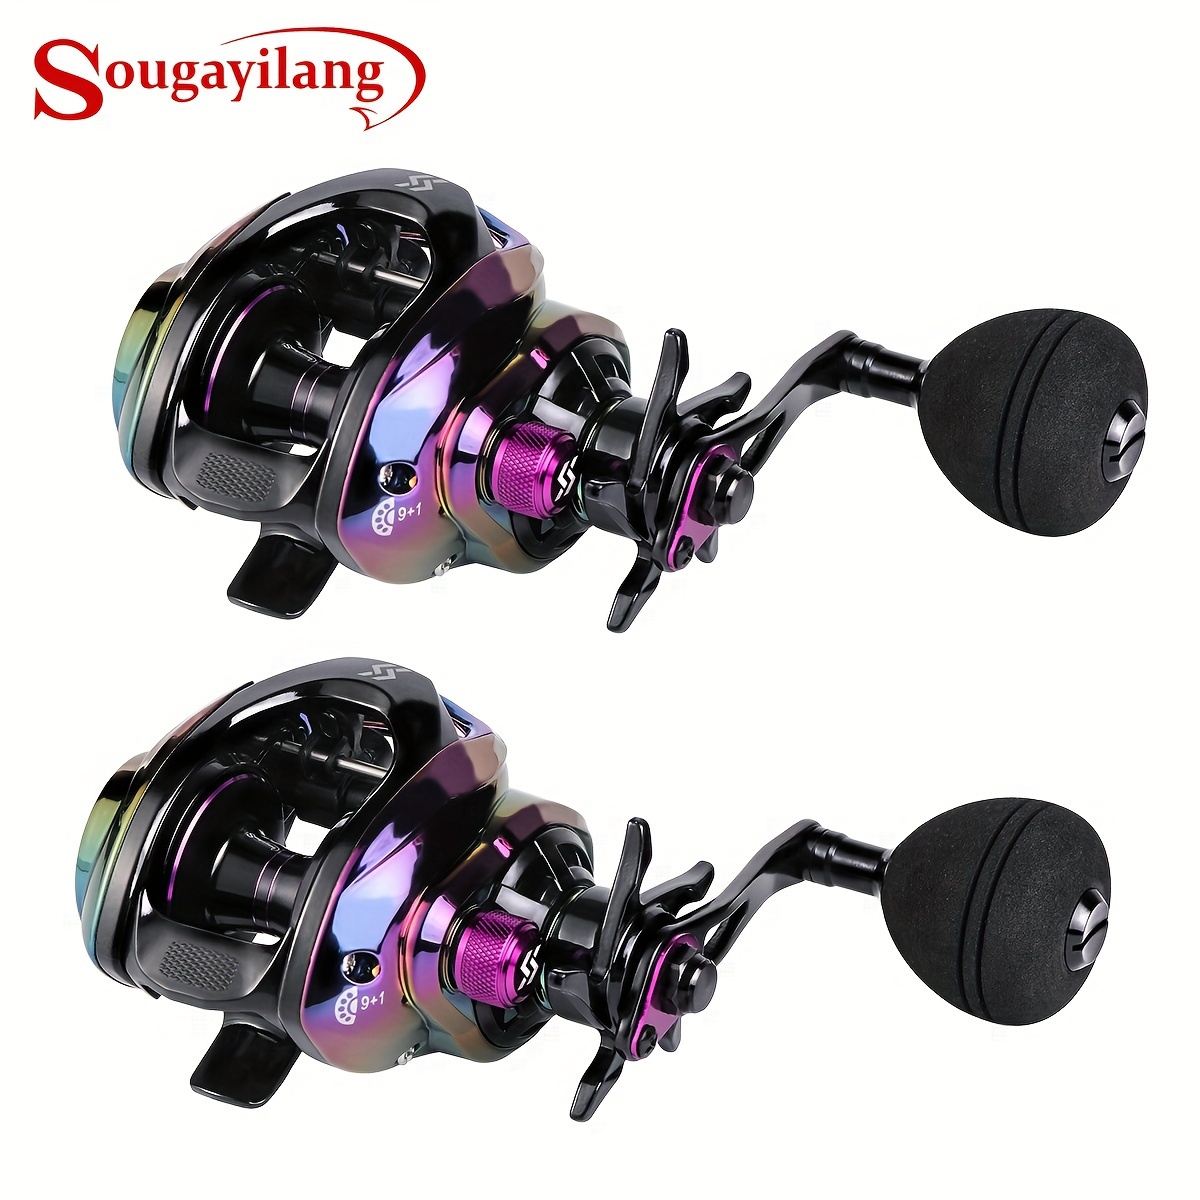 Sougayilang 1pc Baitcasting Fishing Reel, High Speed Baitcaster With 9+1  Ball Bearings, Gear Ratio 8.0:1, Magnetic Brake System, Power Handle Casting